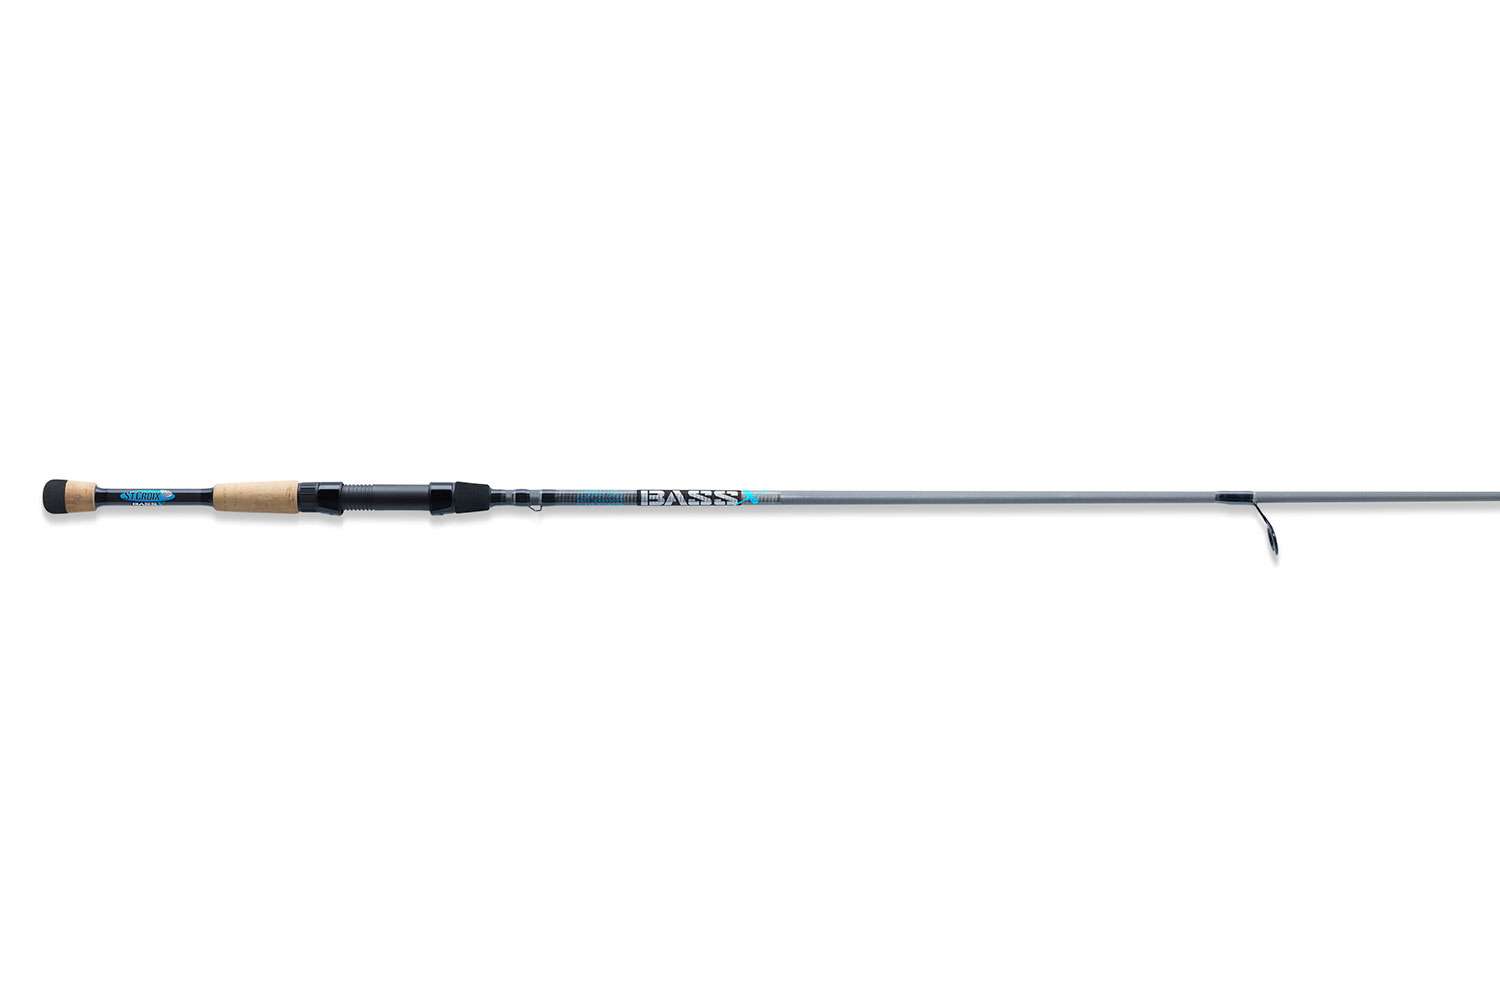 <p><b>St. Croix Bass X, $100-$110</b></p> Bass fisherman have been liberated, now able to cross the threshold into St. Croix ownership for a straight-up hundred bucks â and a little something for the taxman, of course. Not lost in the value-proposition, though, is the supreme technology and performance imbued in Bass X. </p> Bass X combines St. Croixâs legendary, handcrafted quality with purely-premium componentry. The magic begins with St. Croixâs proven SCII graphite blank; not the amalgamation of anonymous carbon fibers found in similarly priced rods. Moreover, the SCII graphite blank gets two baths of Flex Coat finish to add durability and fuel that awesome Bass X mark with extra pop. <br> <a href=